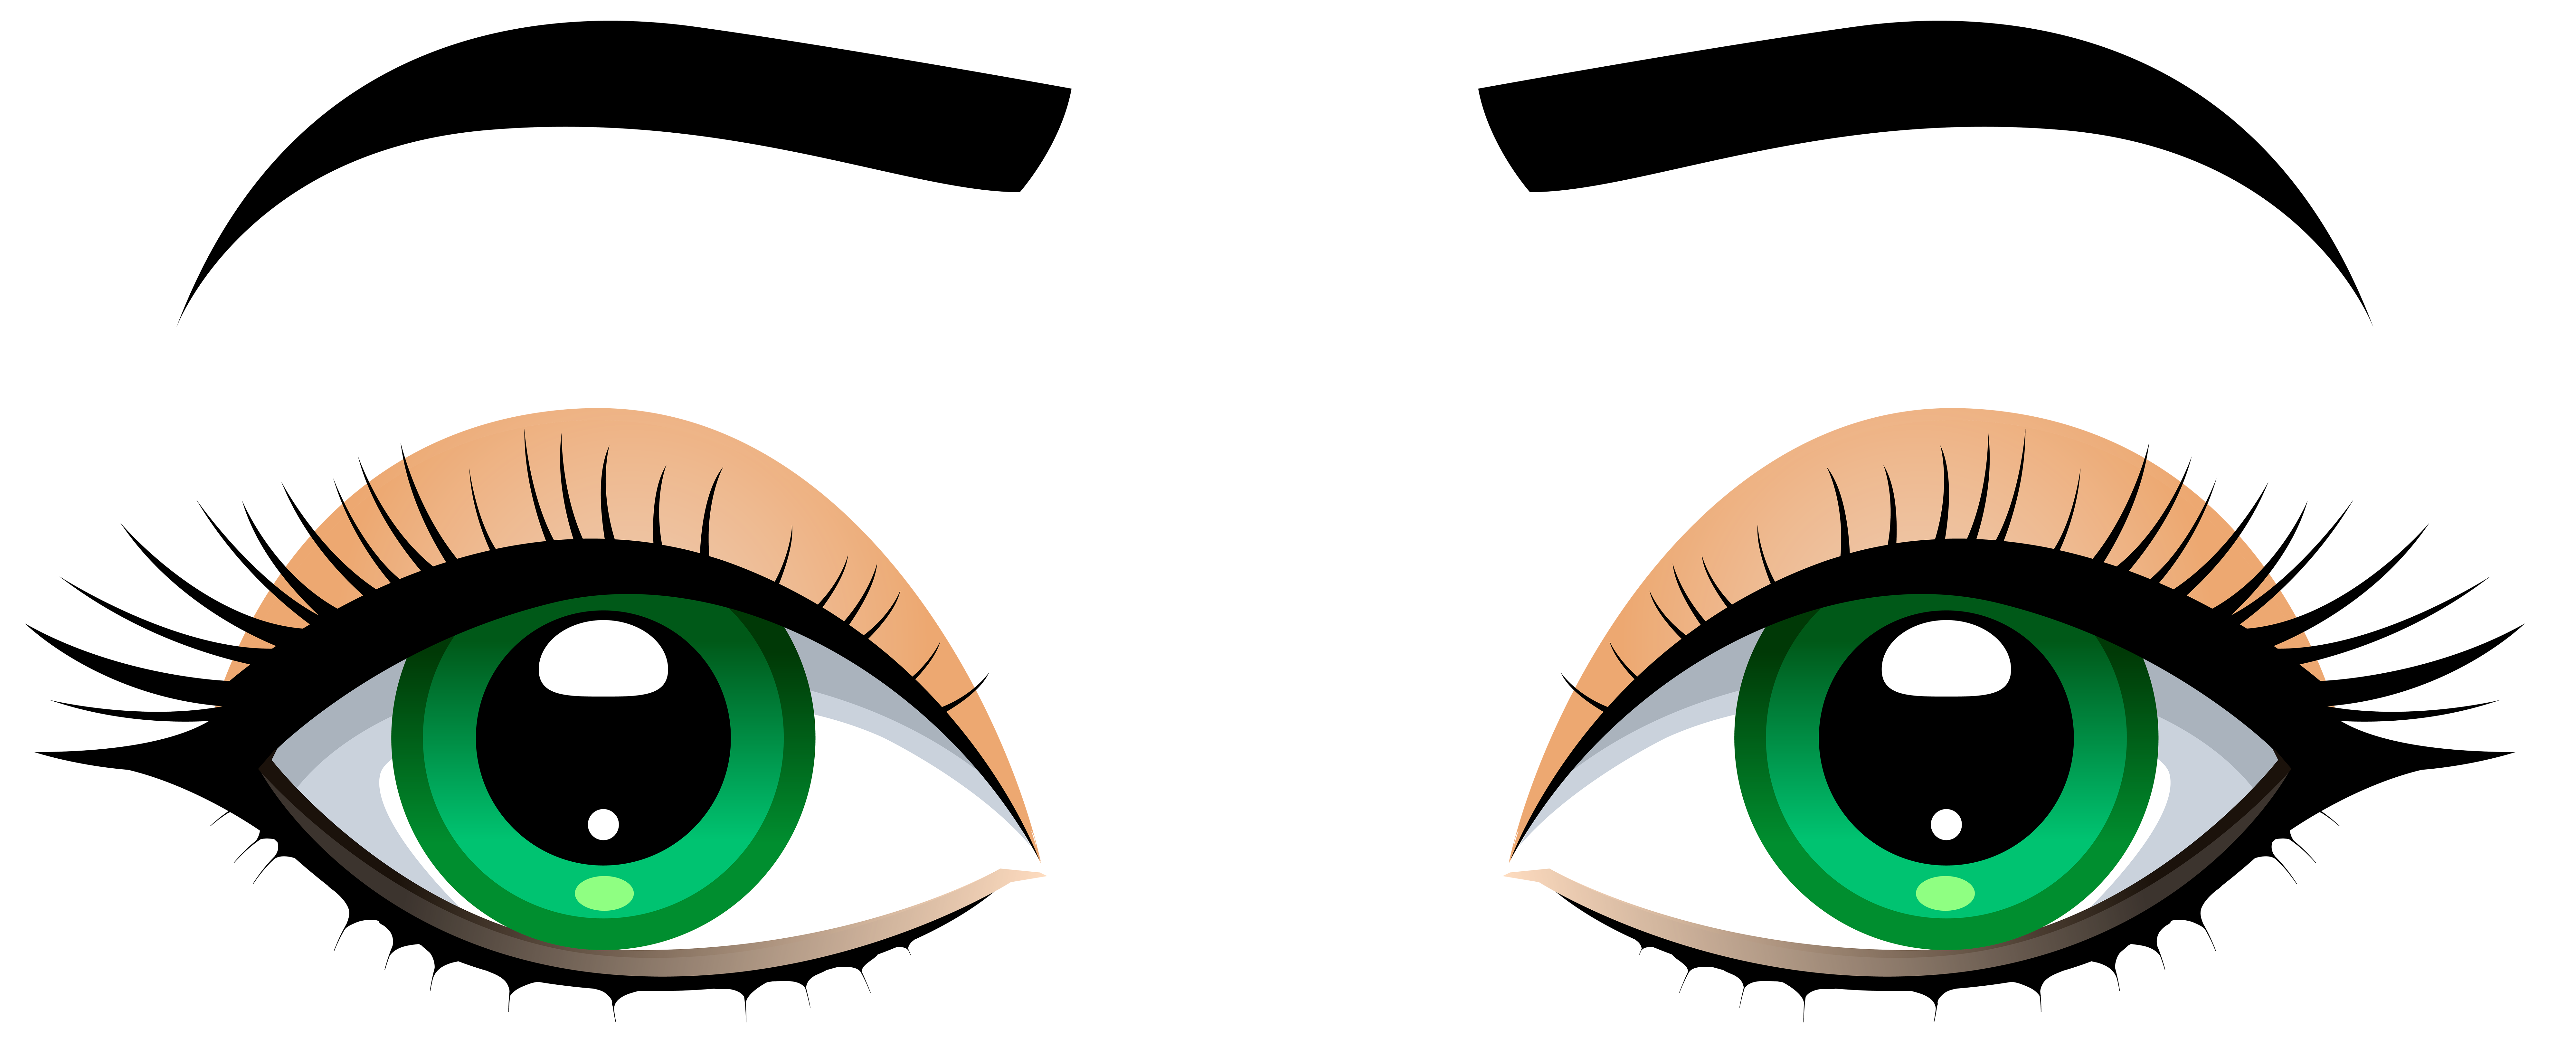 Female eyes with eyebrows. Eyebrow clipart